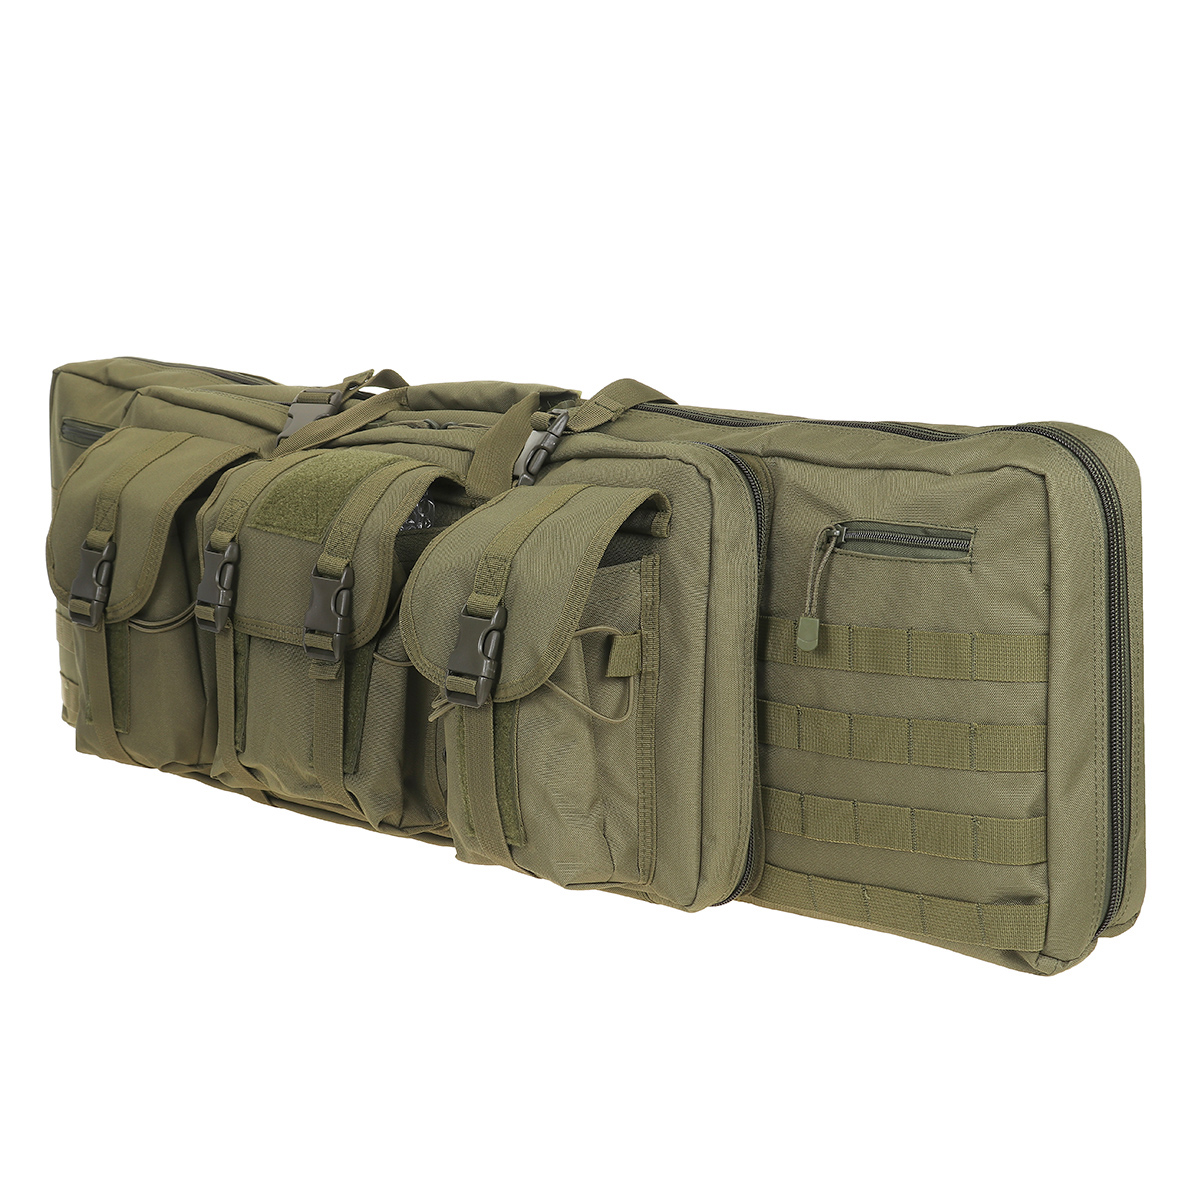 42-inch-Multifunctional-600D-Oxford-Cloth-Outdoor-Tactical-Storage-Bag-Double-Padded-Backpack-1854880-4